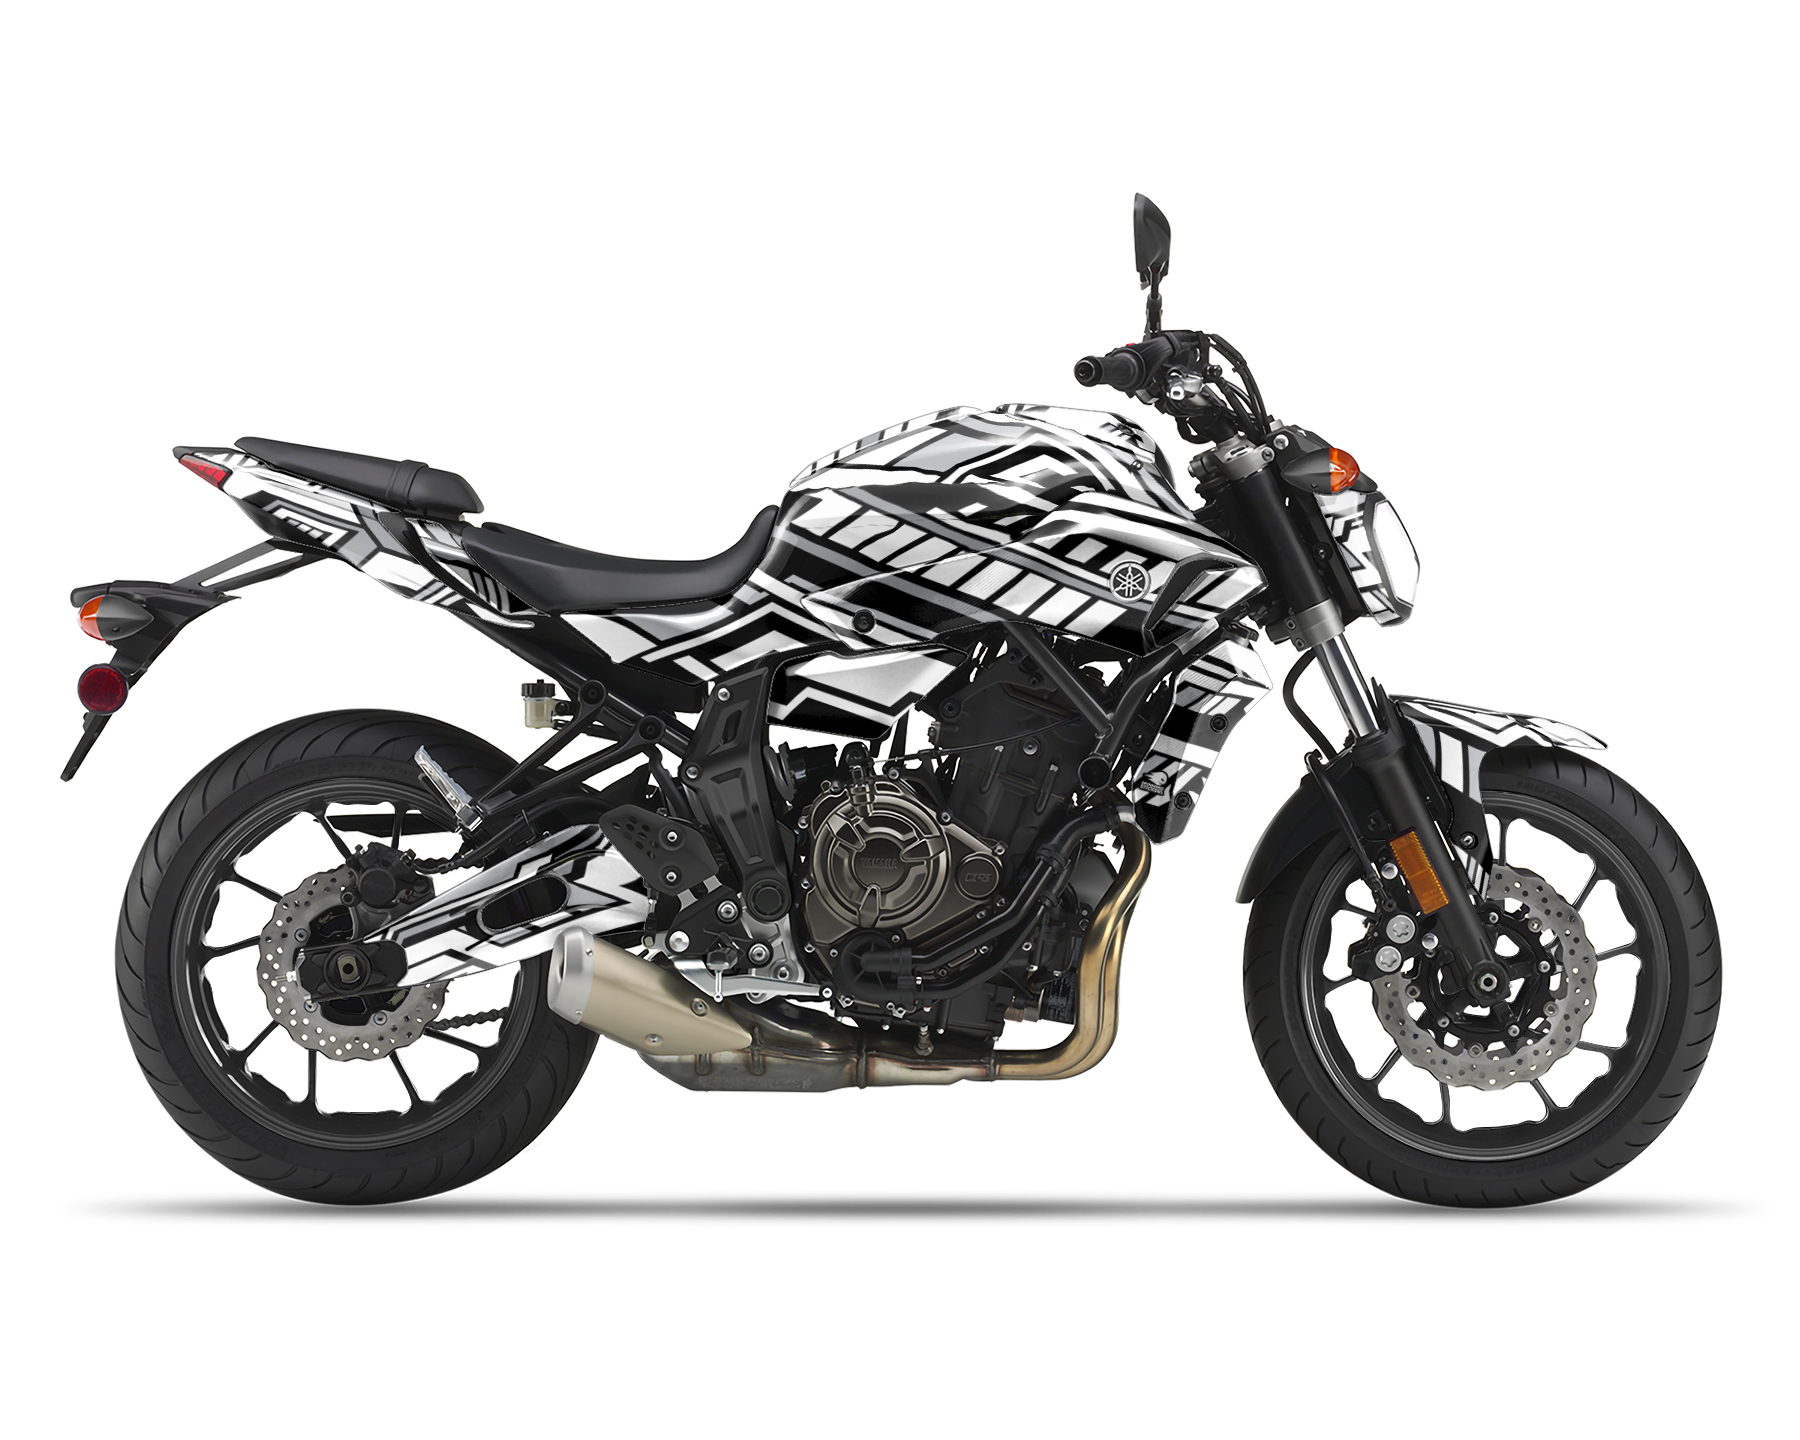 Yamaha MT-07 Motorcycle with white fairing stickers